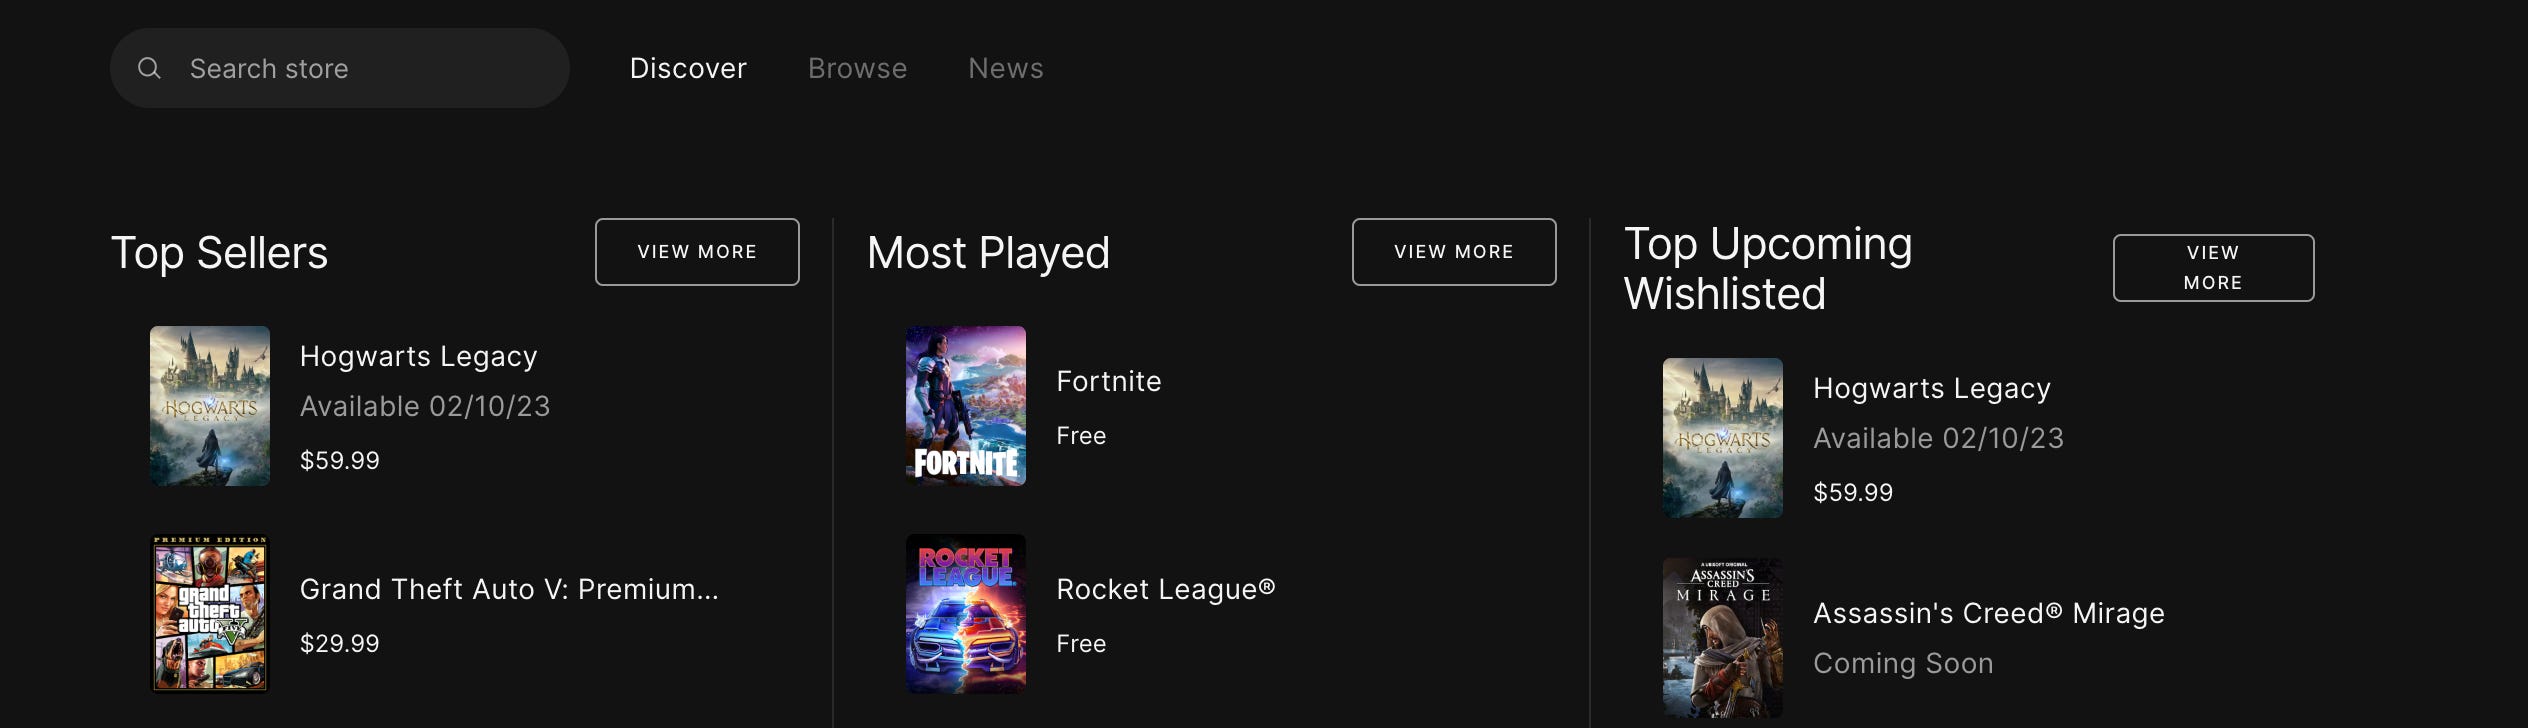 Epic Games Store Offers App, Software and Game Distribution